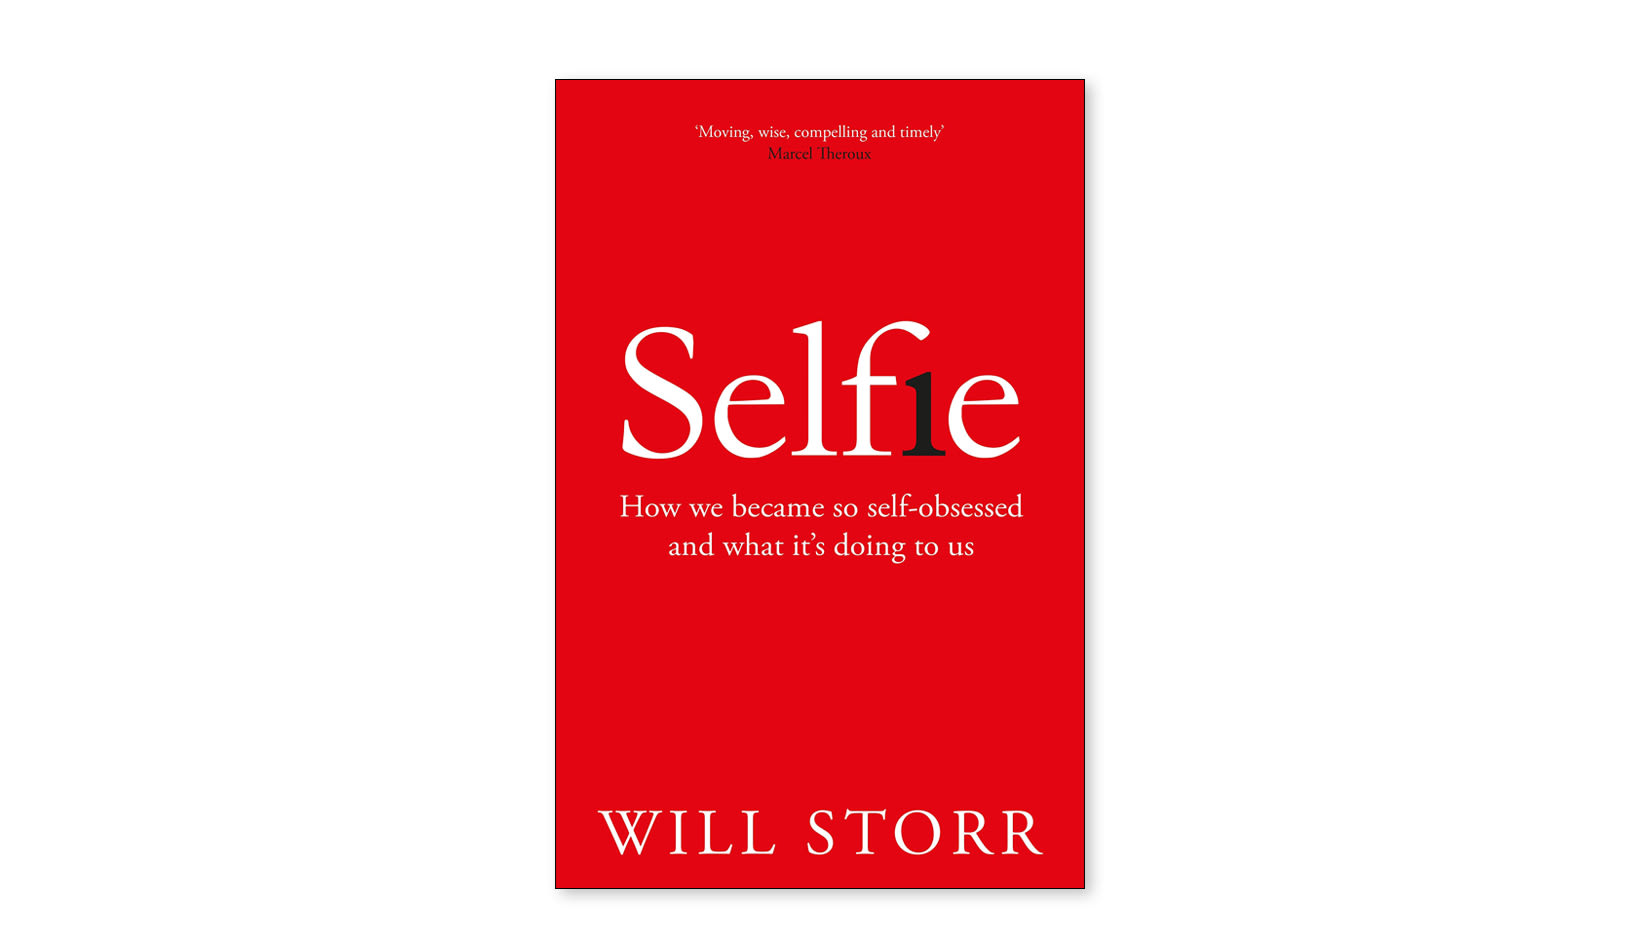 Selfie: How We Became So Self-Obsessed and What It's Doing to Us